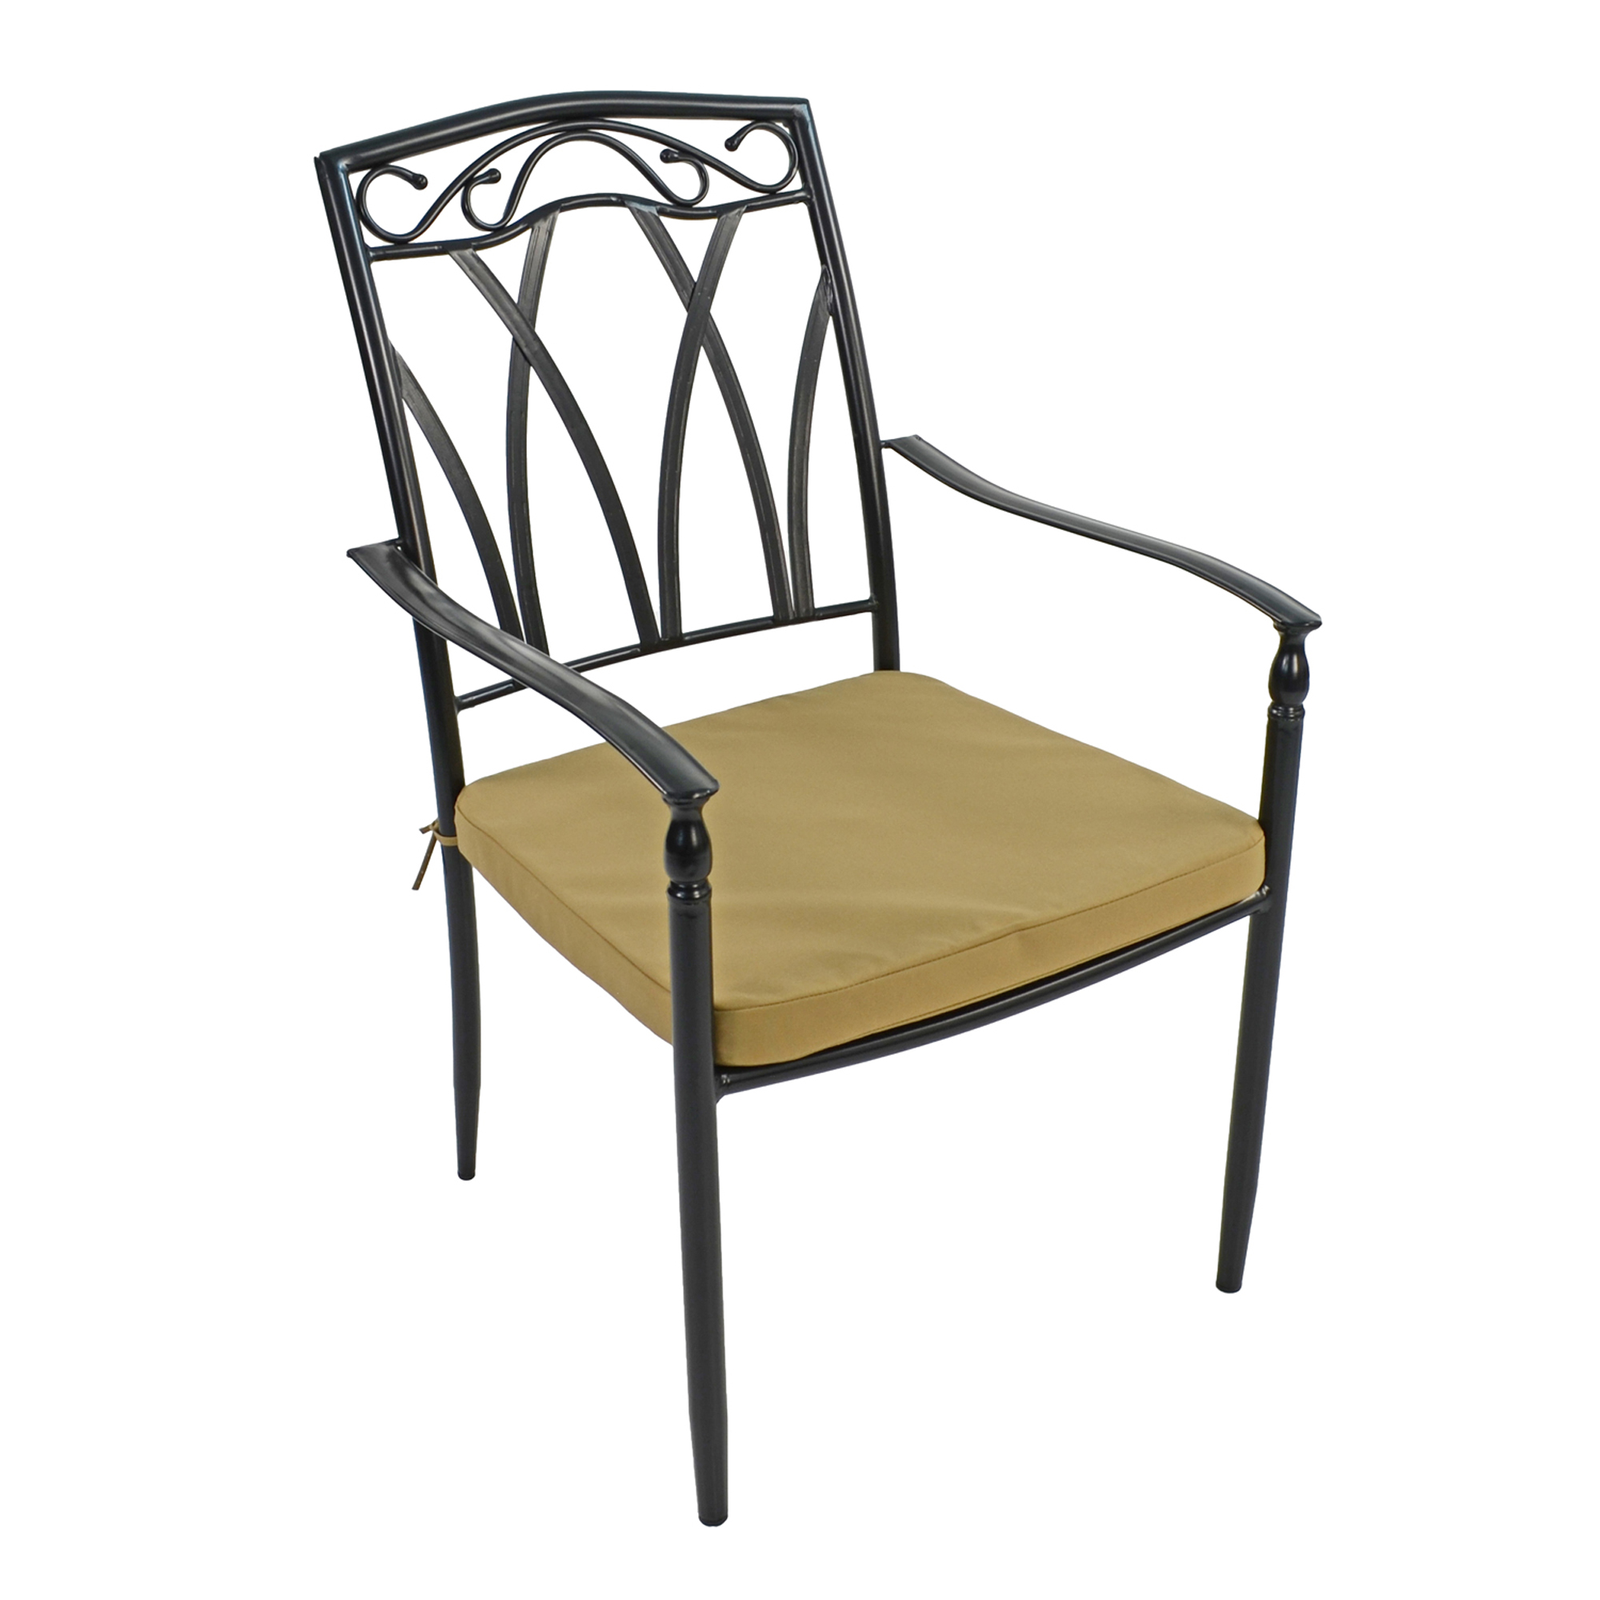 Exclusive Garden Richmond 76cm Table With 2 Ascot Chairs Set Dining Sets Exclusive Garden   